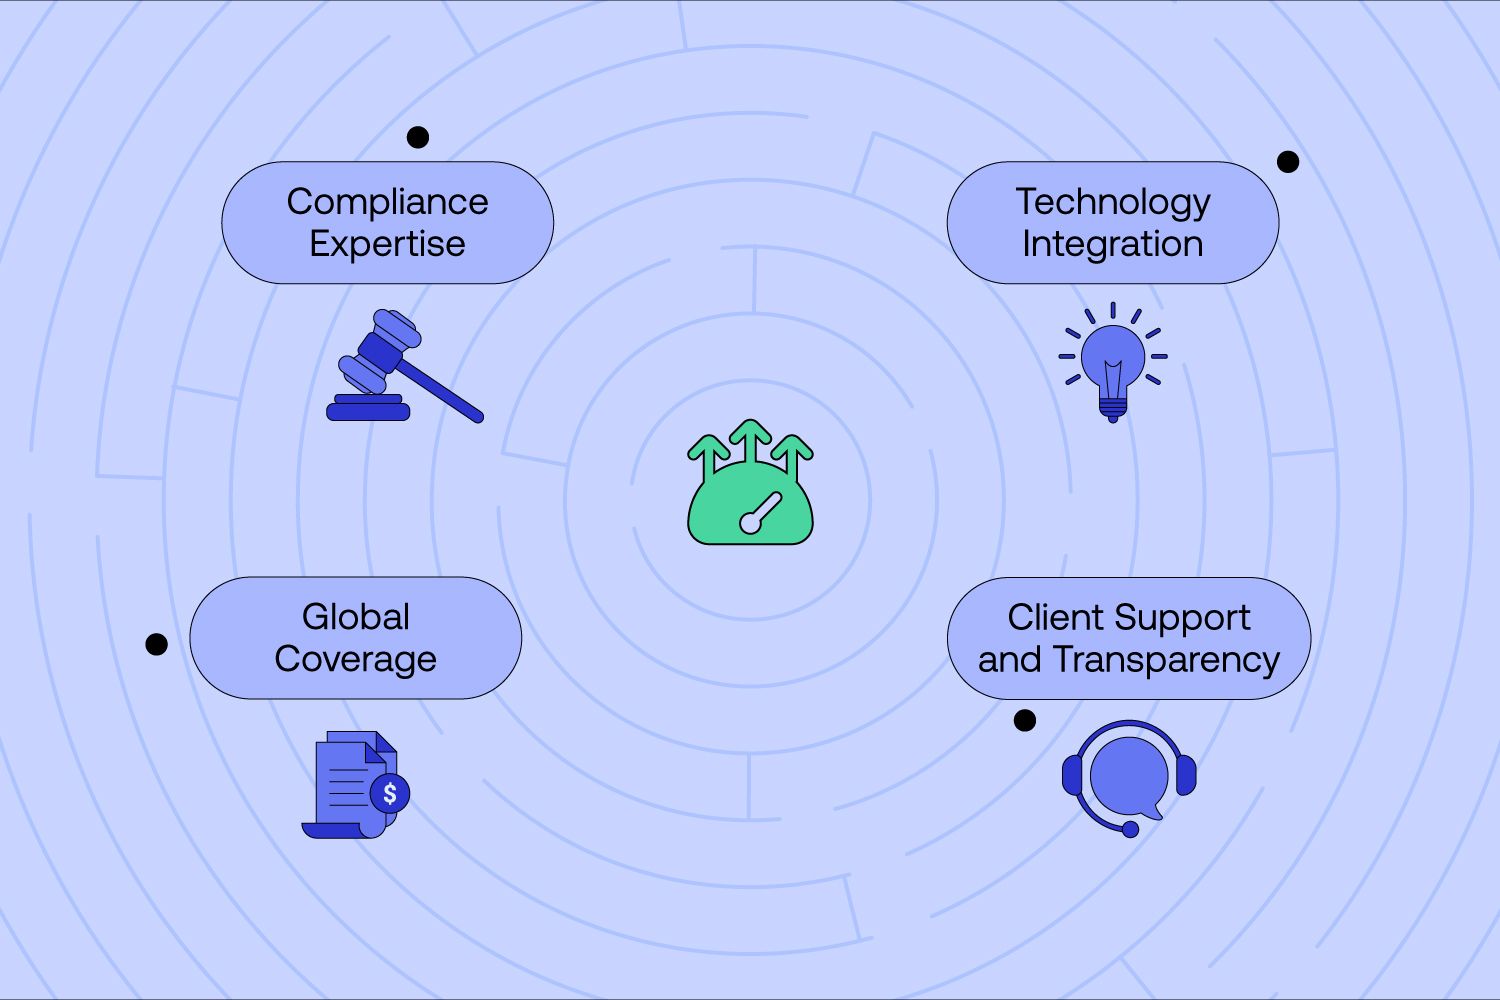 The complexities of EOR include compliance expertise, technology integration, global coverage and client support and transparency